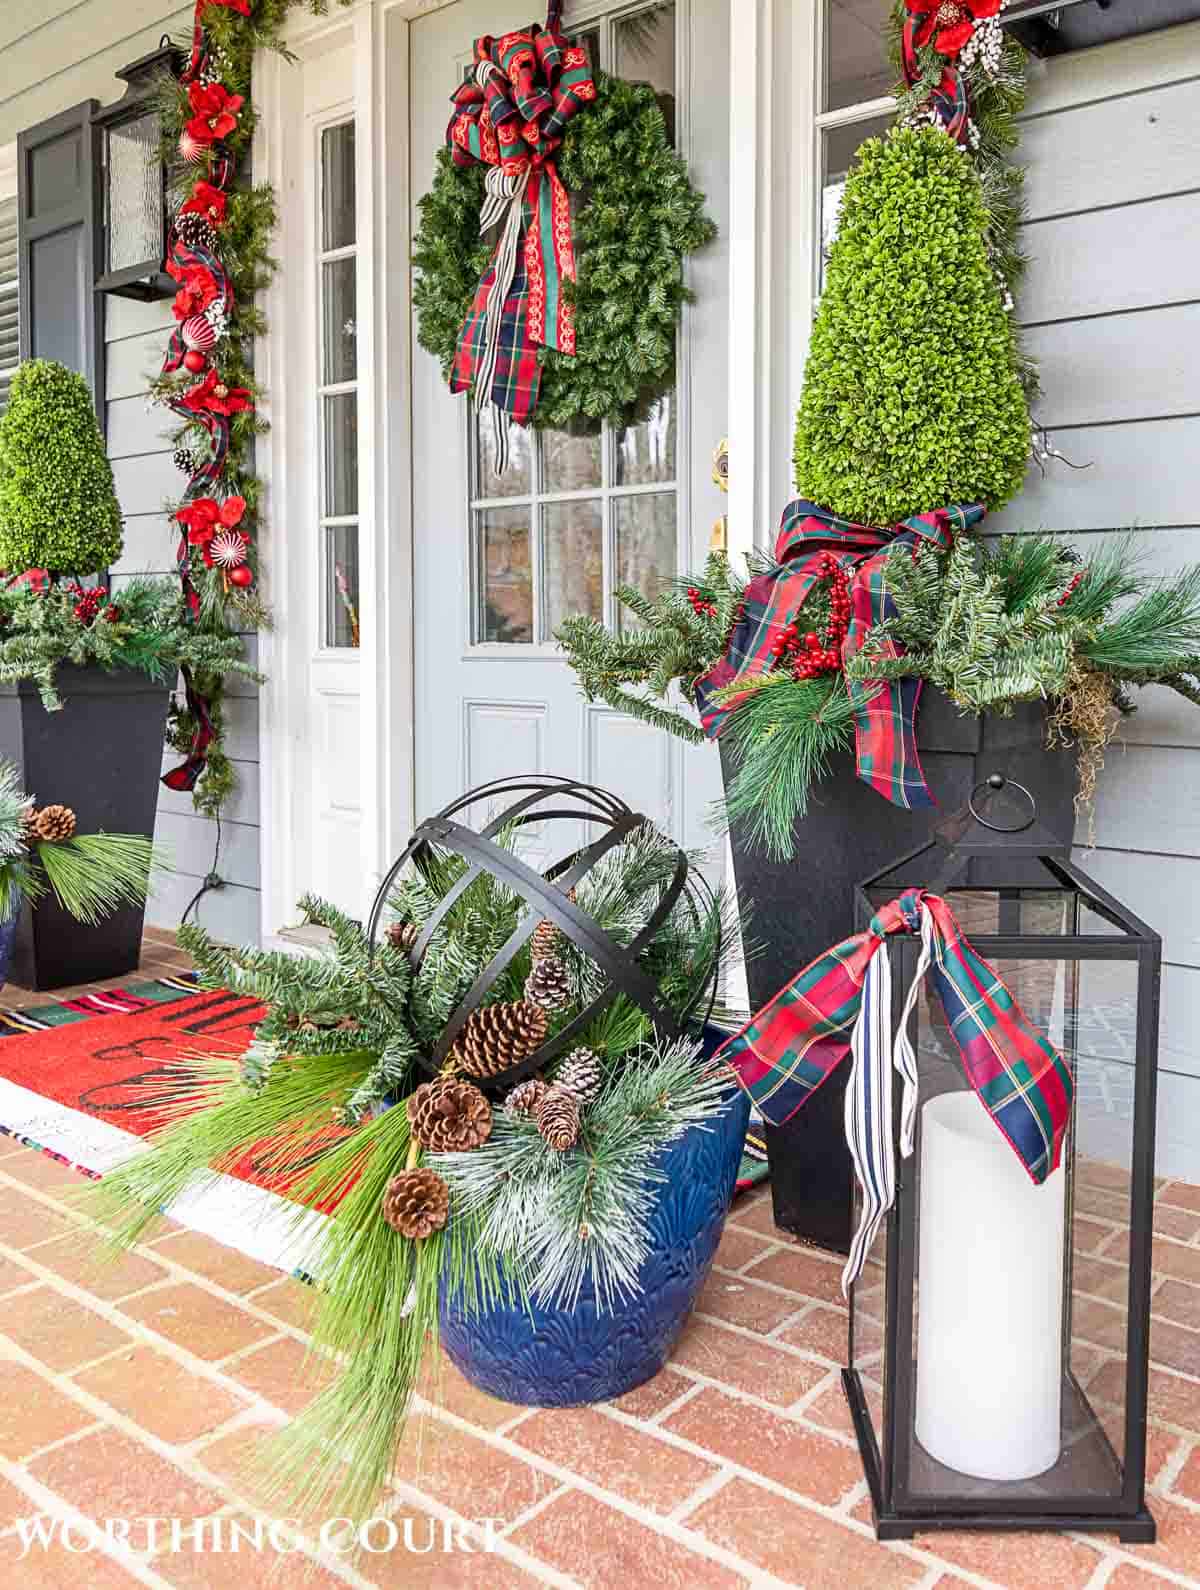 Front porch decorated for Christmas with red and green decorations